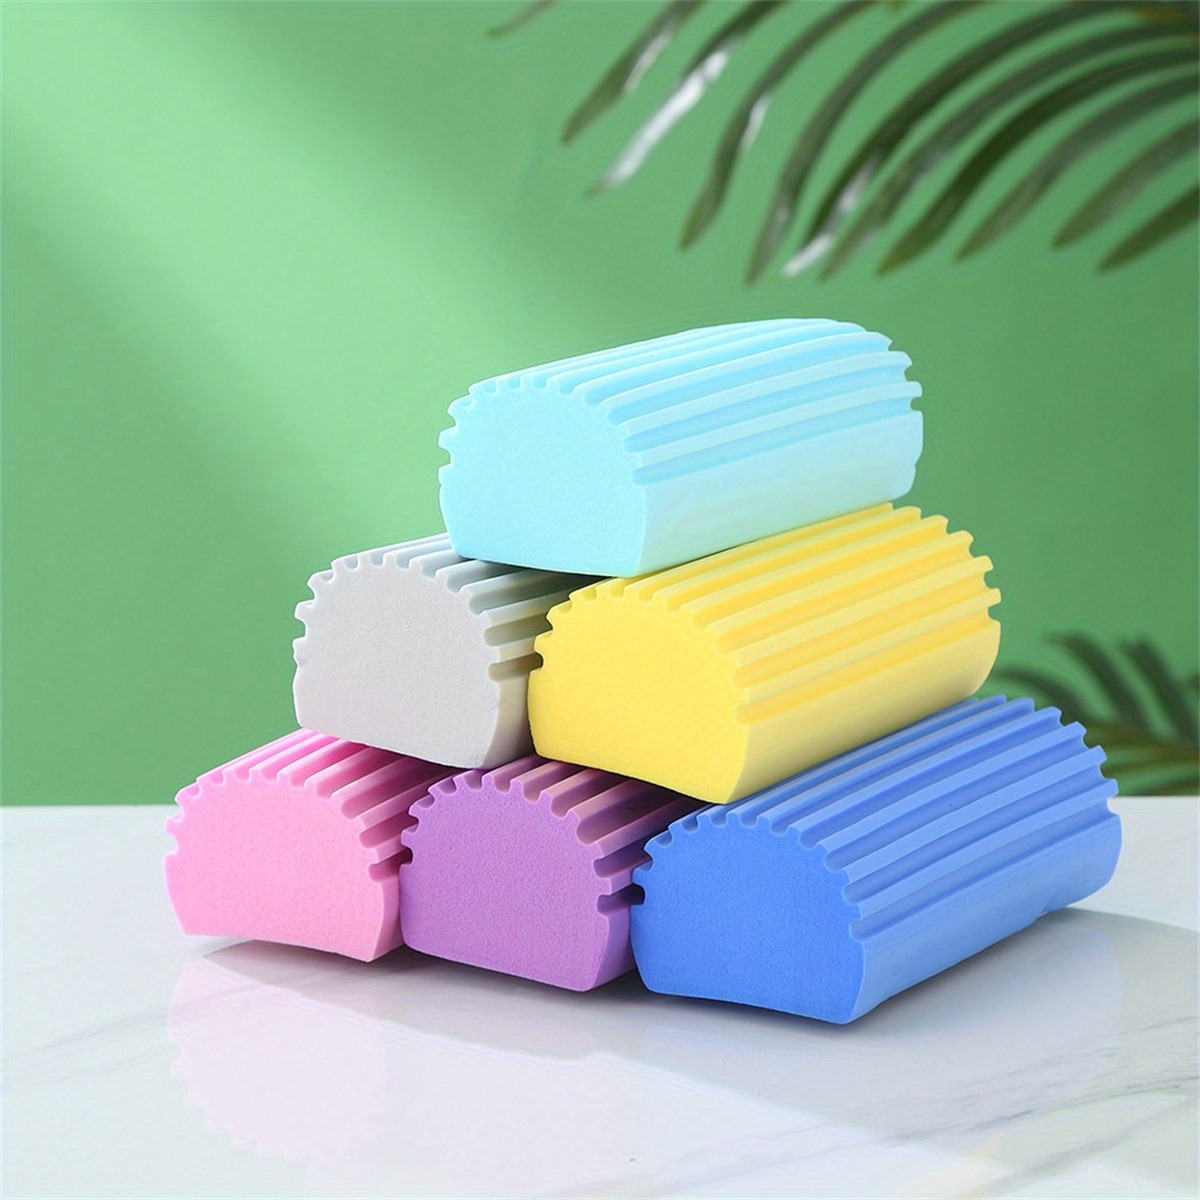 Damp Duster, Magical Dust Cleaning Sponge, Duster For Cleaning Venetian &  Wooden Blinds, Vents, Radiators, Skirting Boards, Mirrors And Cobwebs,  Traps Duster, Pack Of 2 